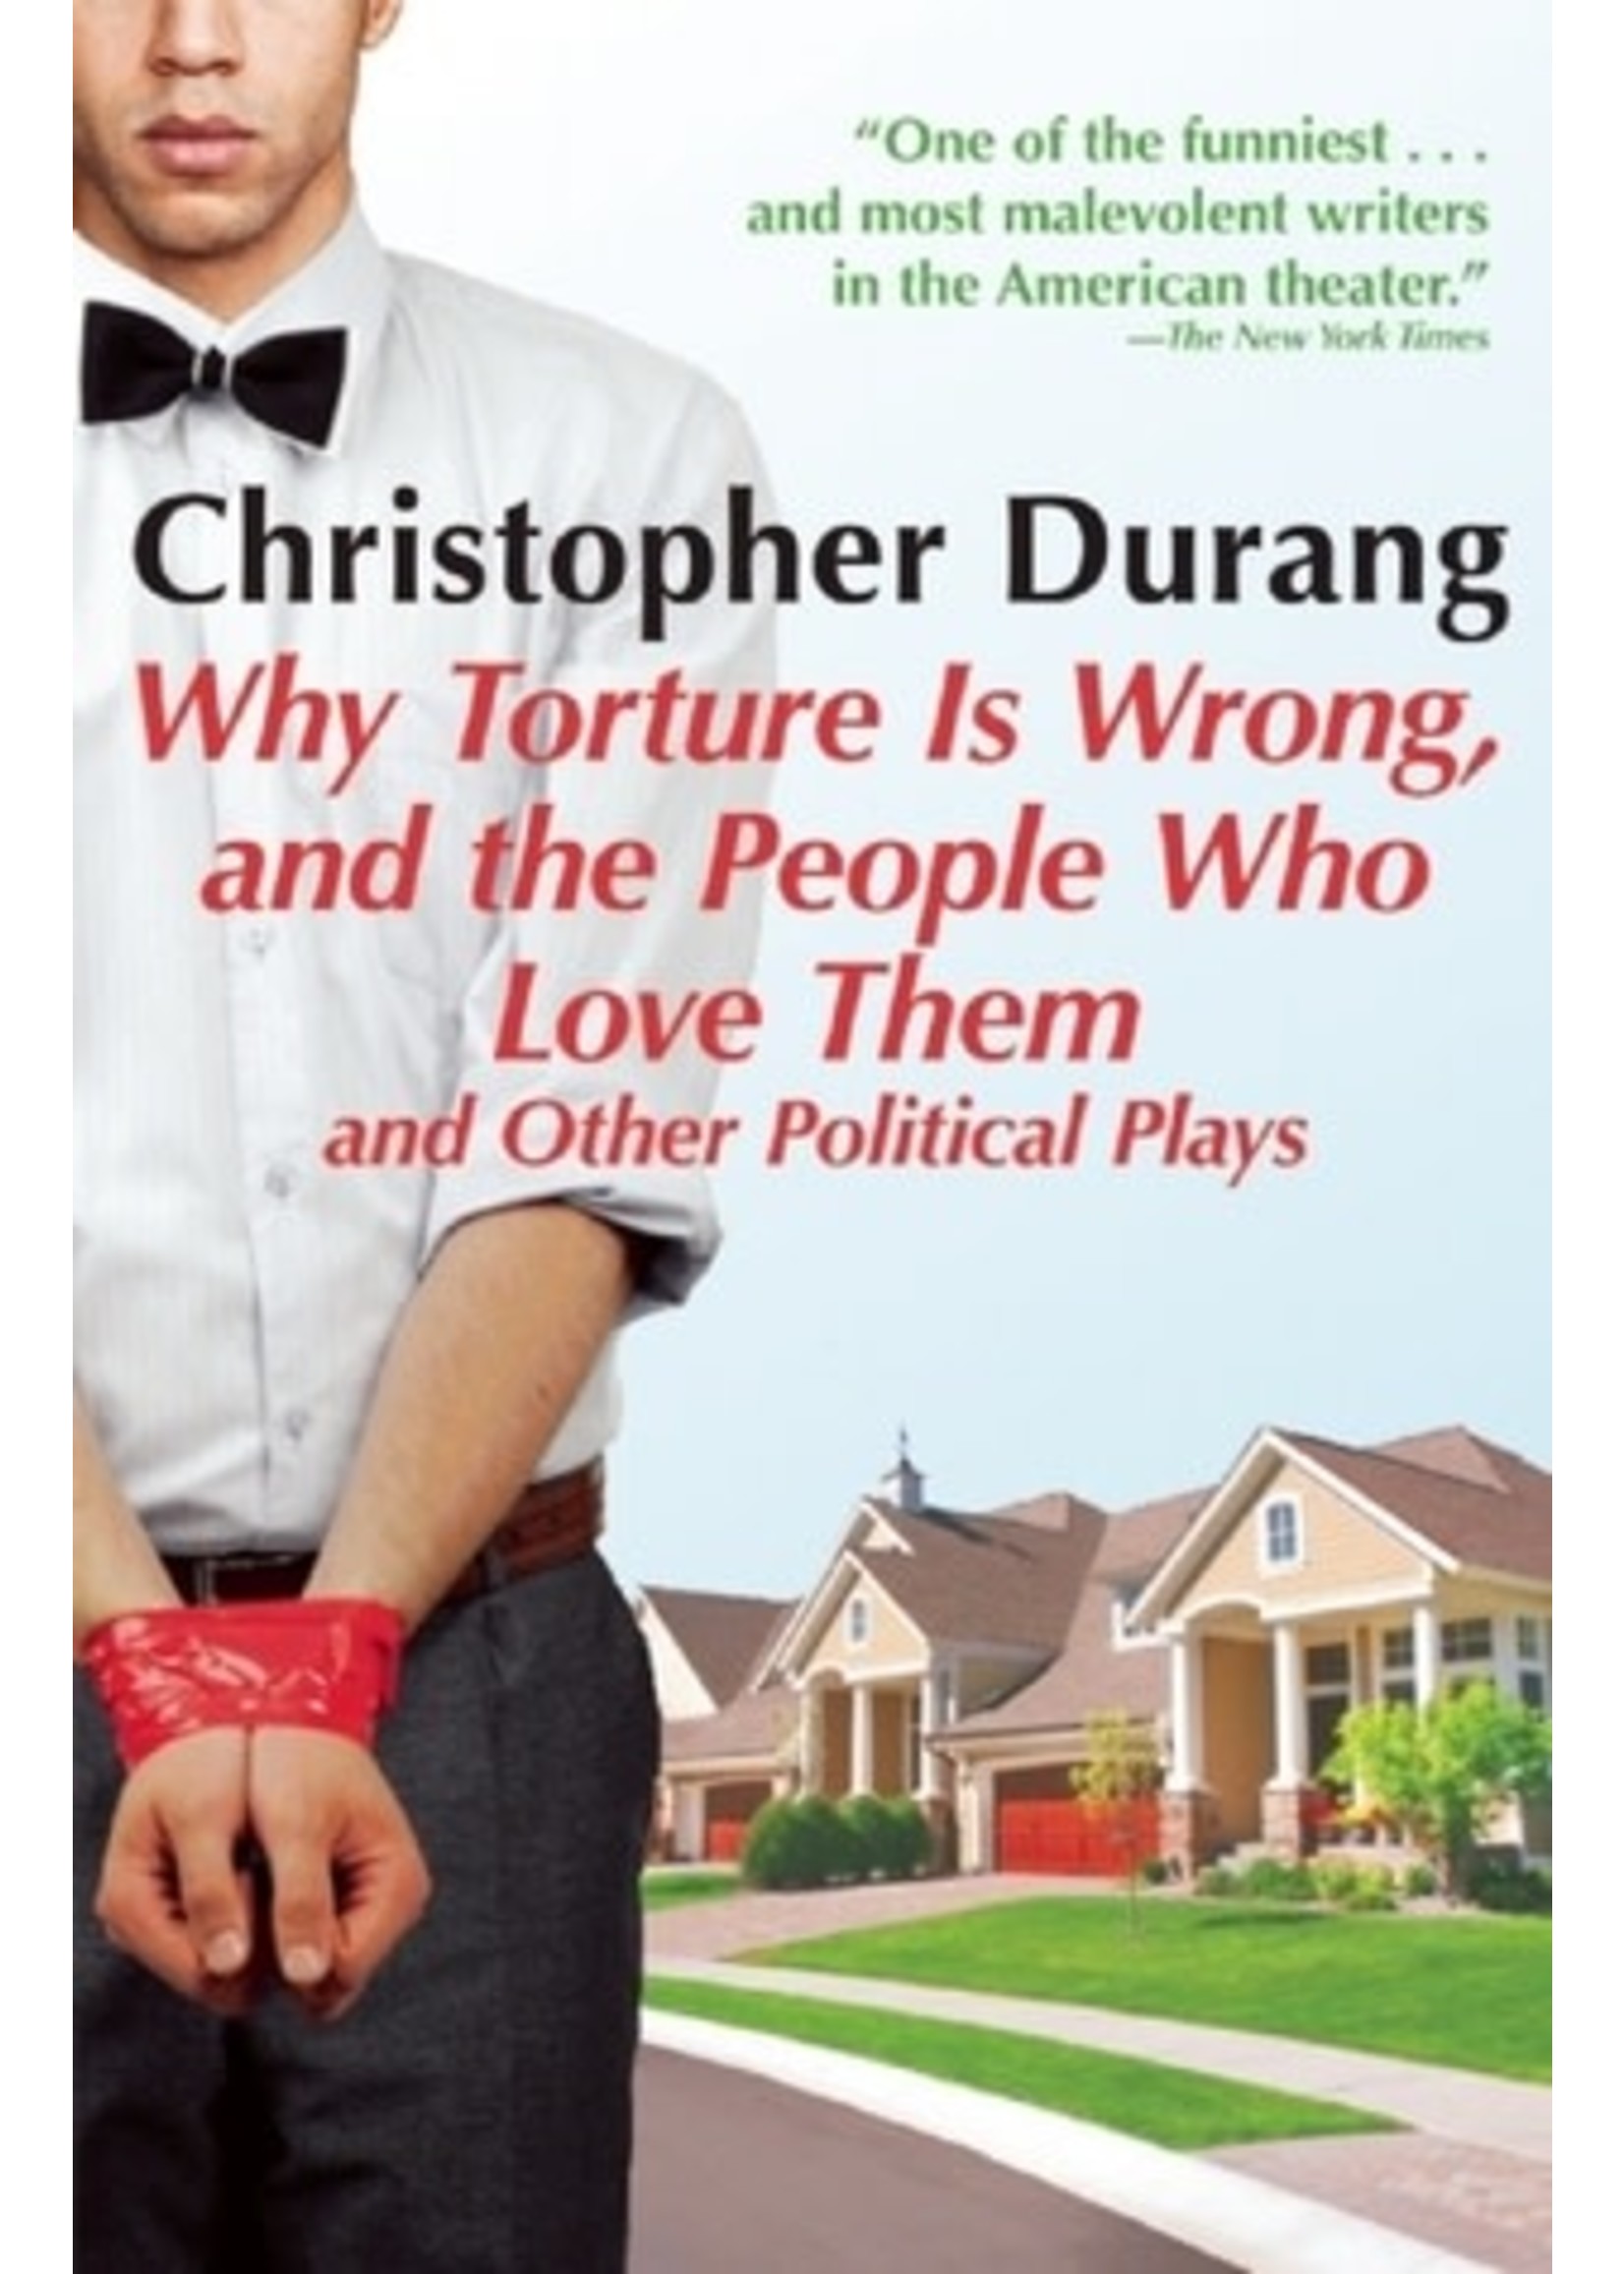 Why Torture is Wrong, and the People Who Love Them by Christopher Durang